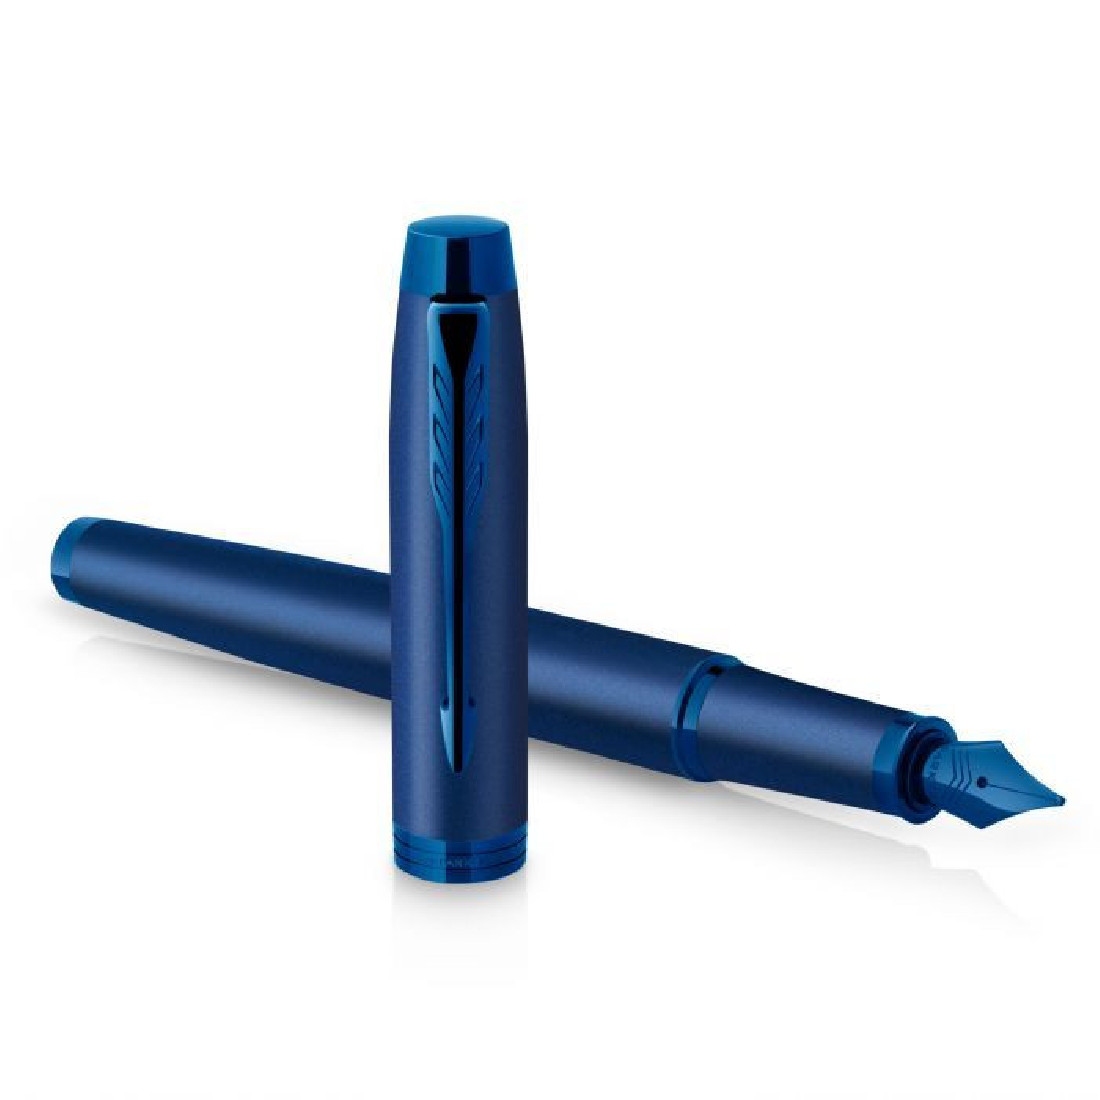 Parker IM Mono Blue Set Fountain pen and Notebook